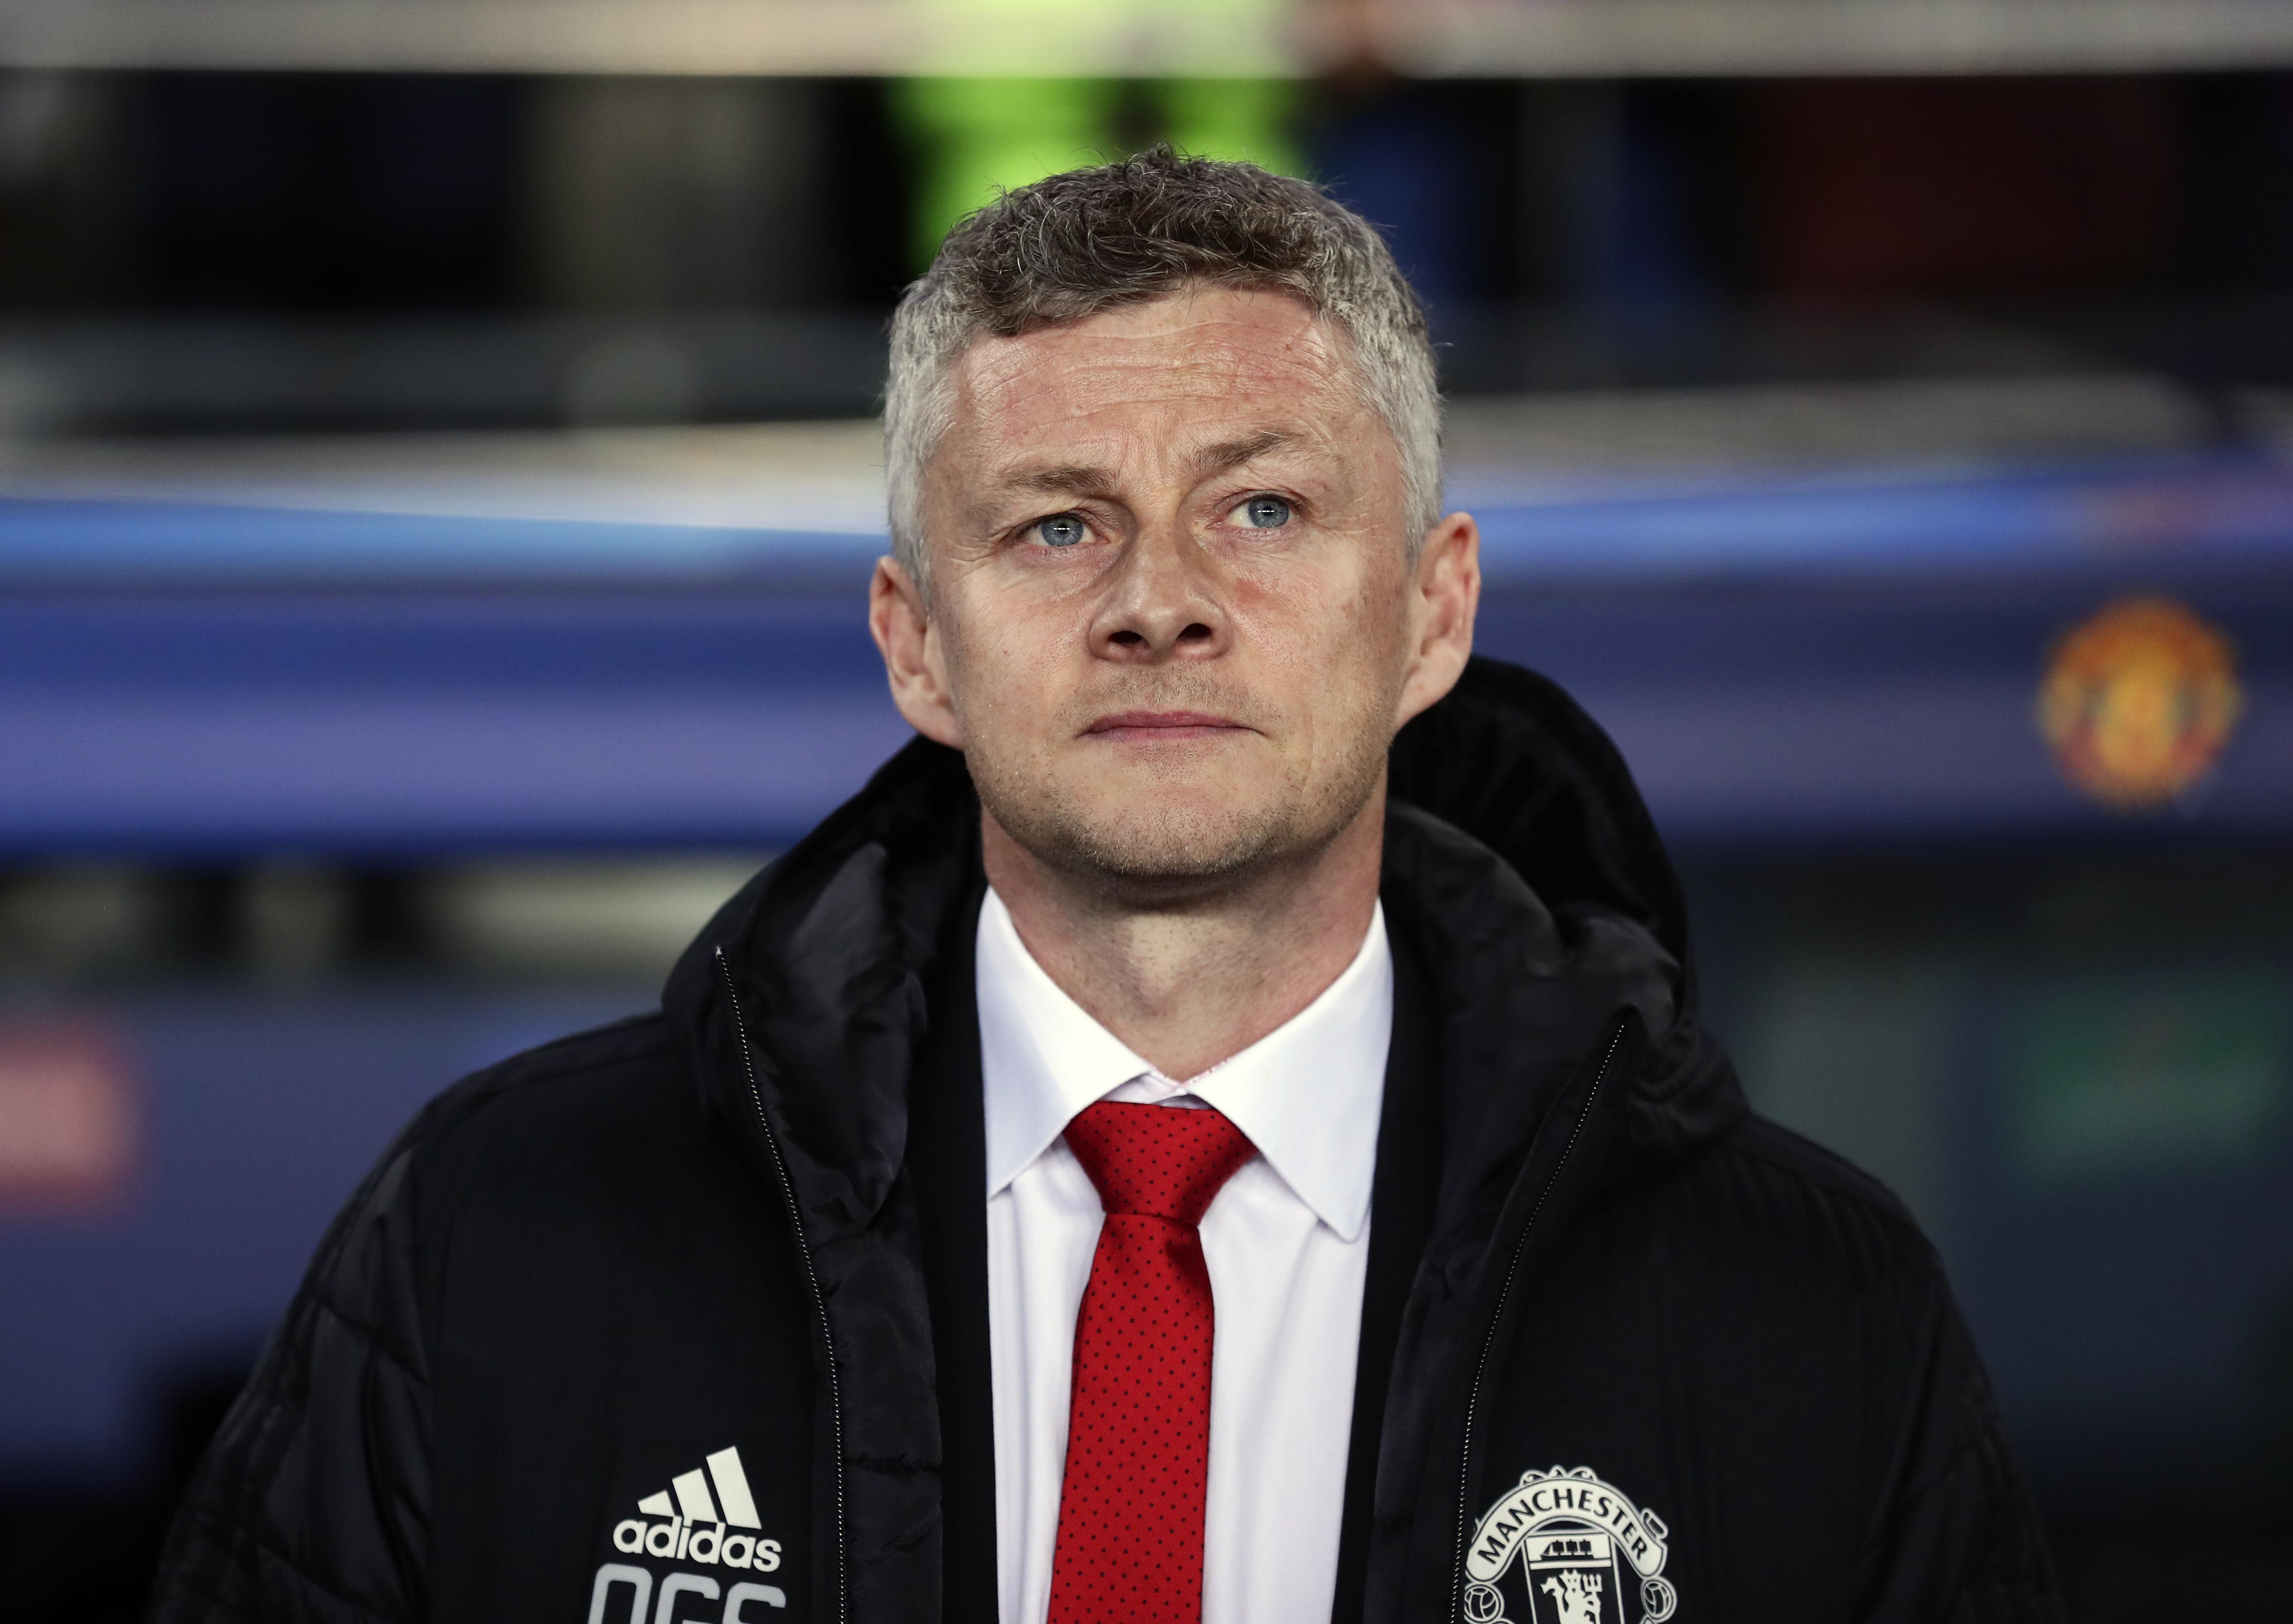 Ole Gunnar Solskjaer to begin much-needed rebuilding job at United | The Spokesman-Review